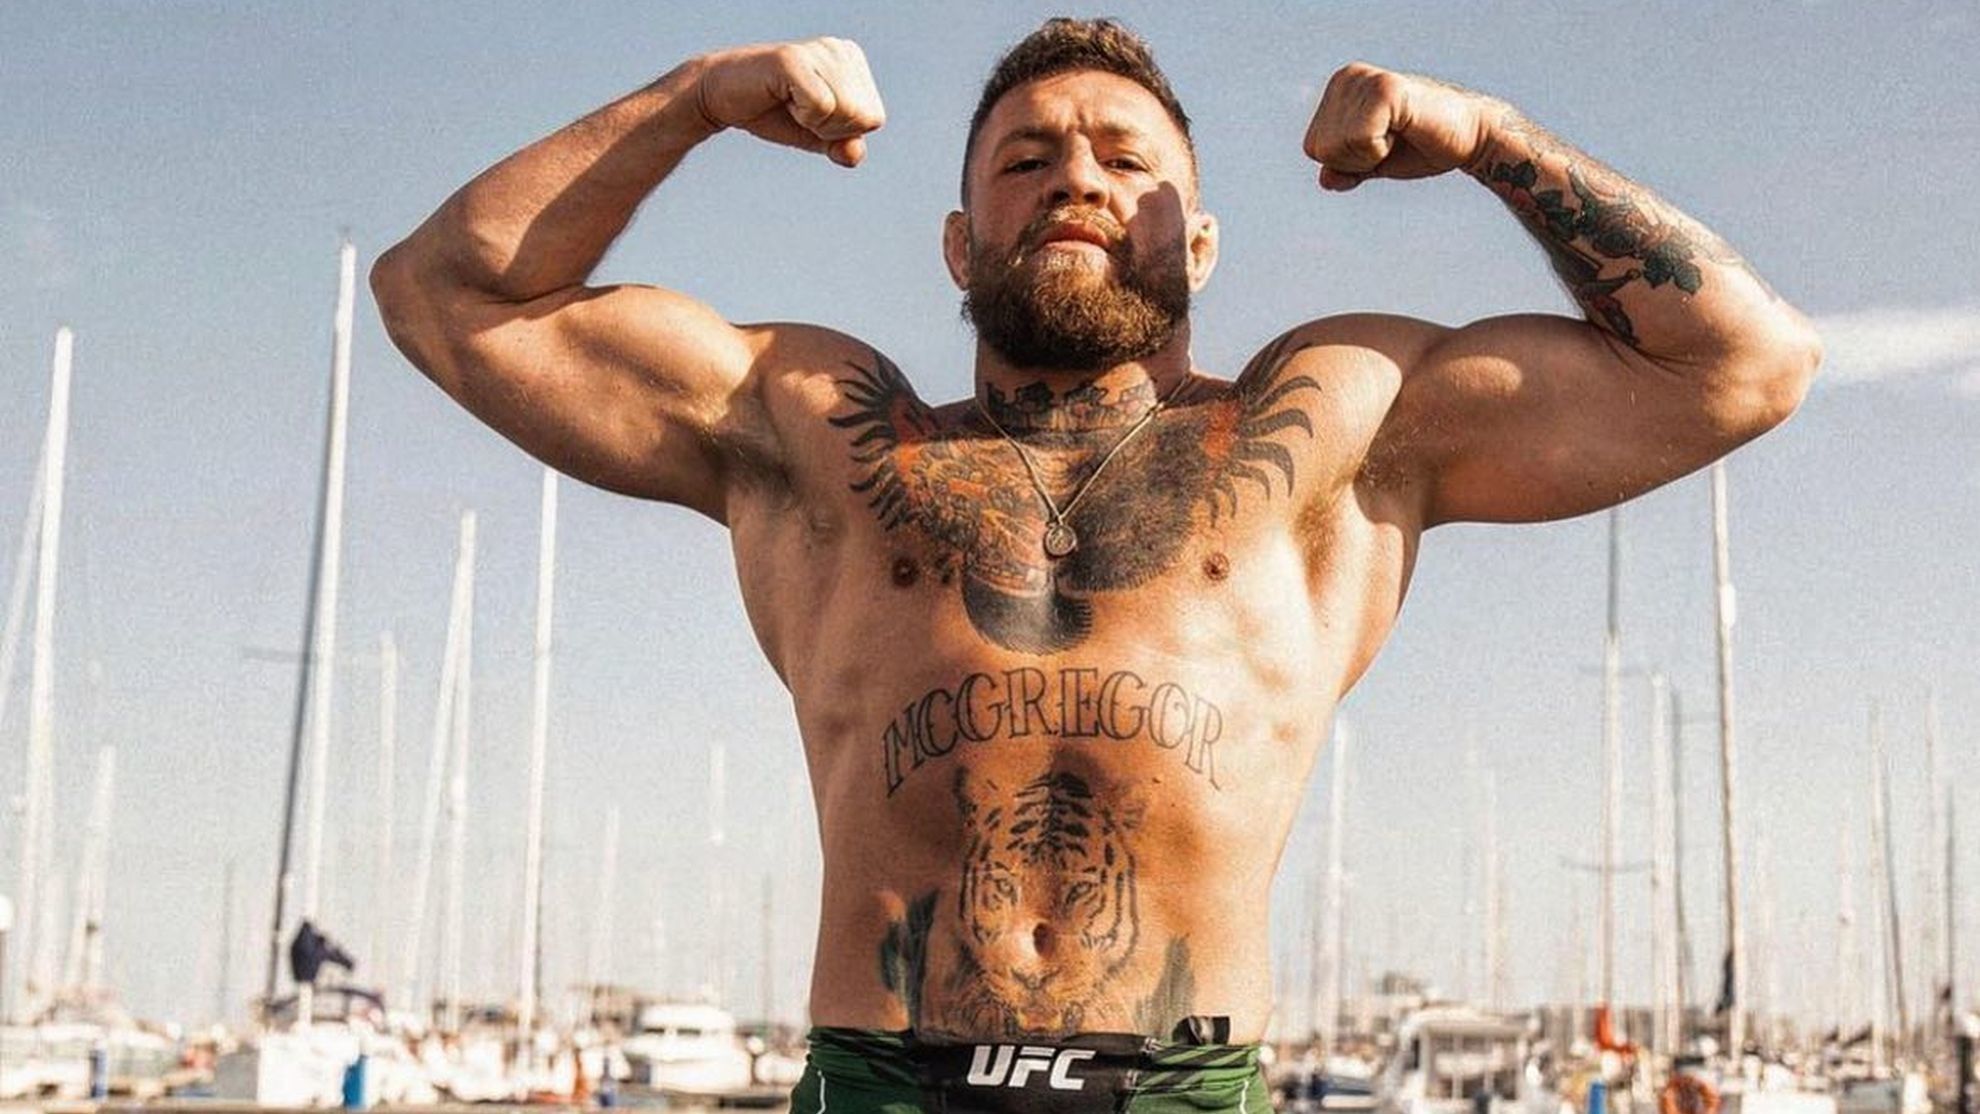 McGregor Shows Training For His Comeback In The UFC